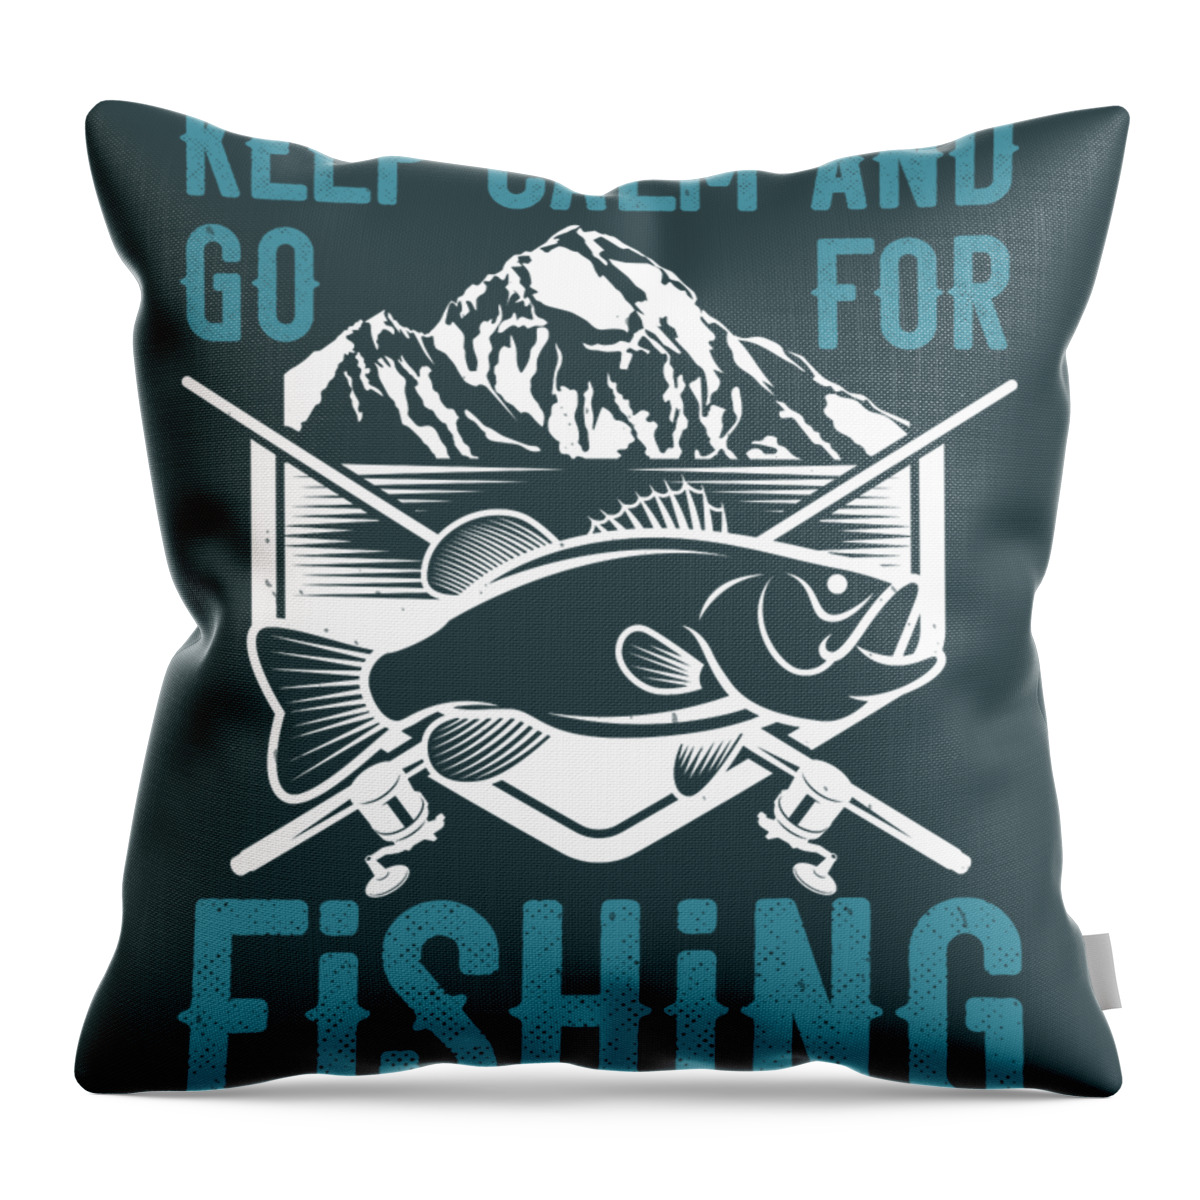 Fishing Throw Pillow featuring the digital art Fishing Gift Keep Calm And Go For Fishing Funny Fisher Gag by Jeff Creation